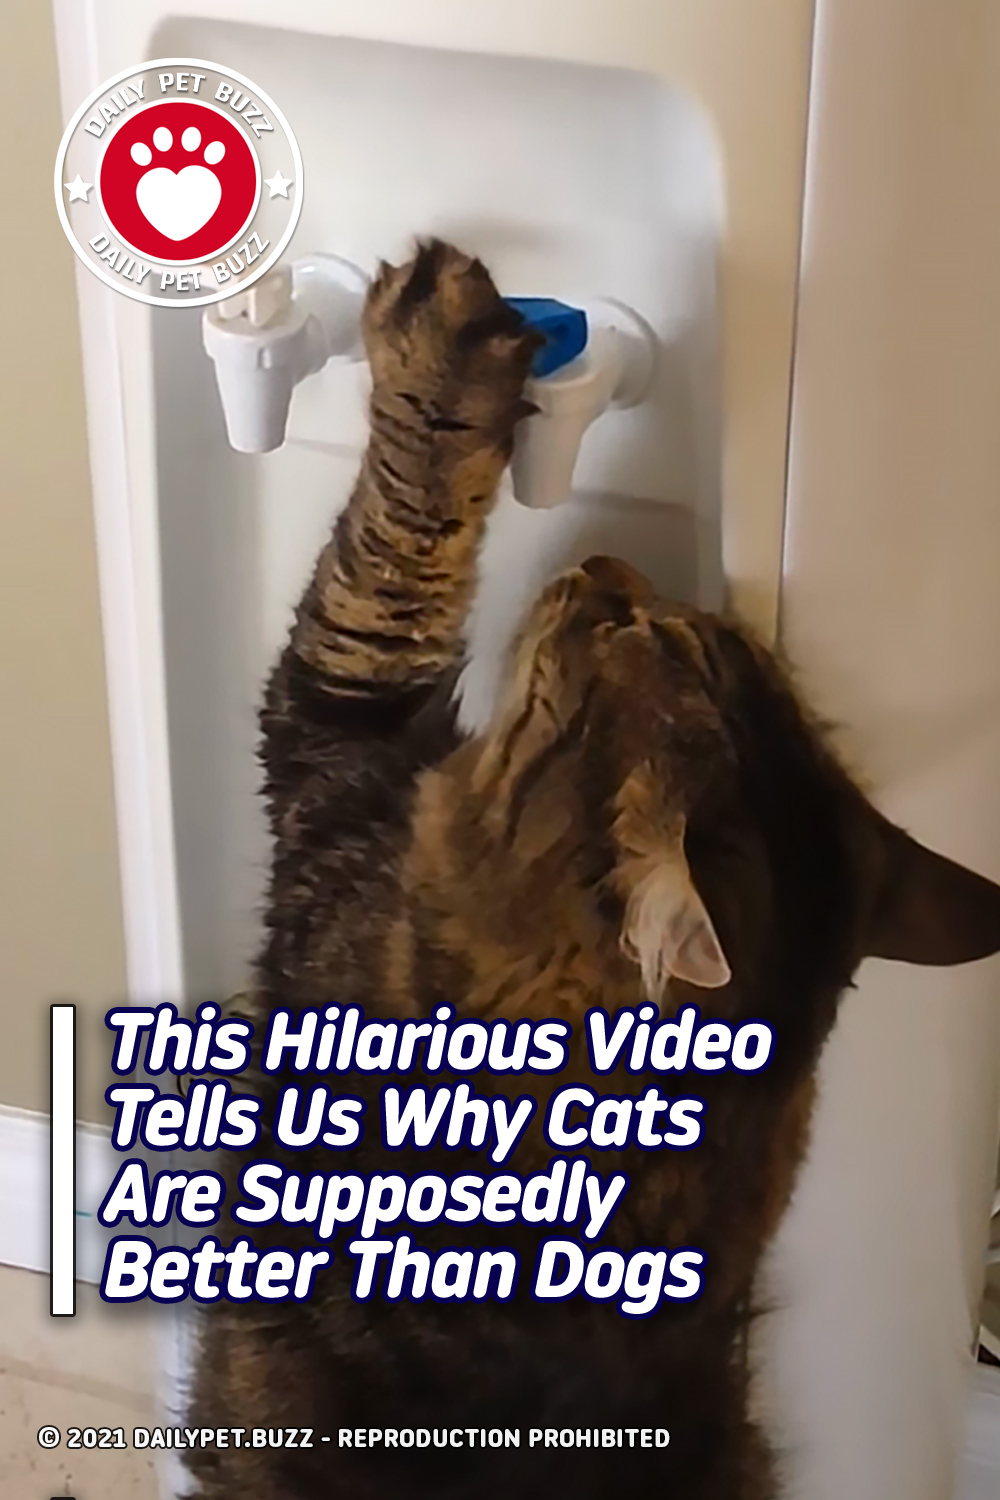 This Hilarious Video Tells Us Why Cats Are Supposedly Better Than Dogs